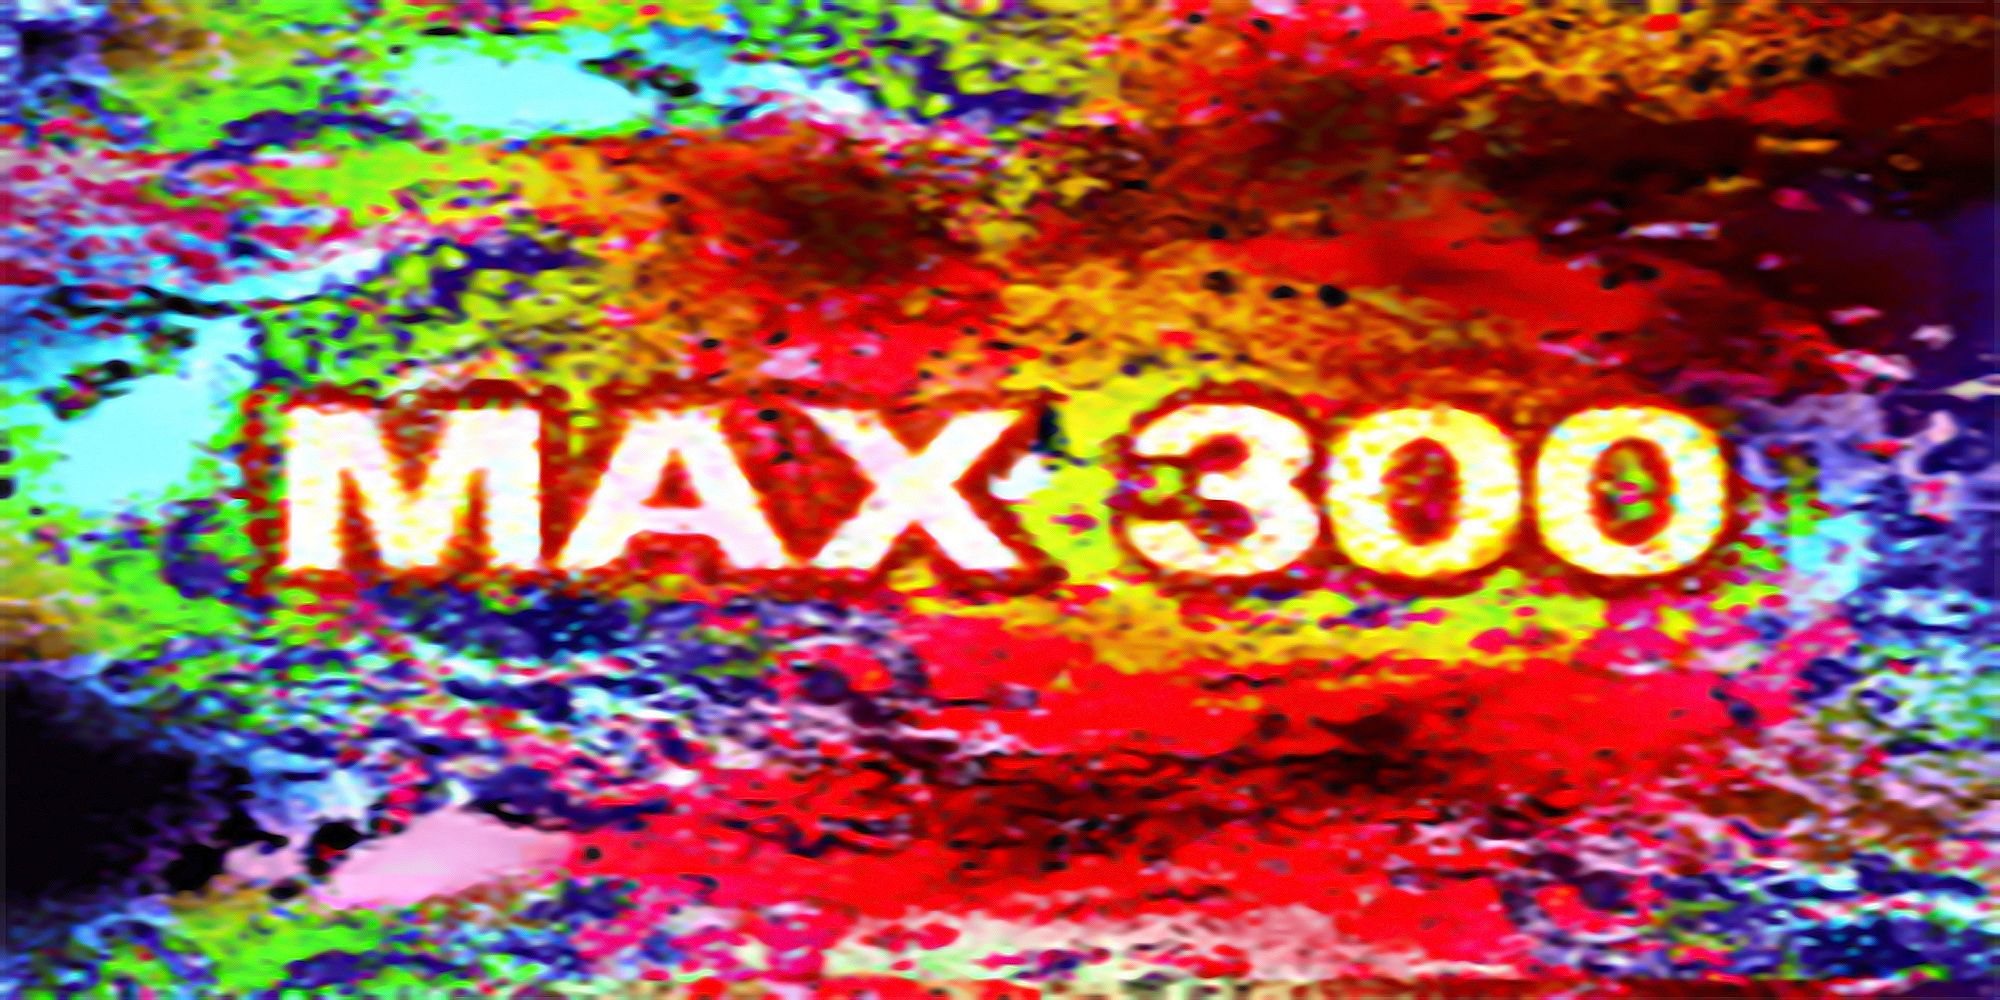 A paint splattered background for the track, MAX 300, from DDRMAX.